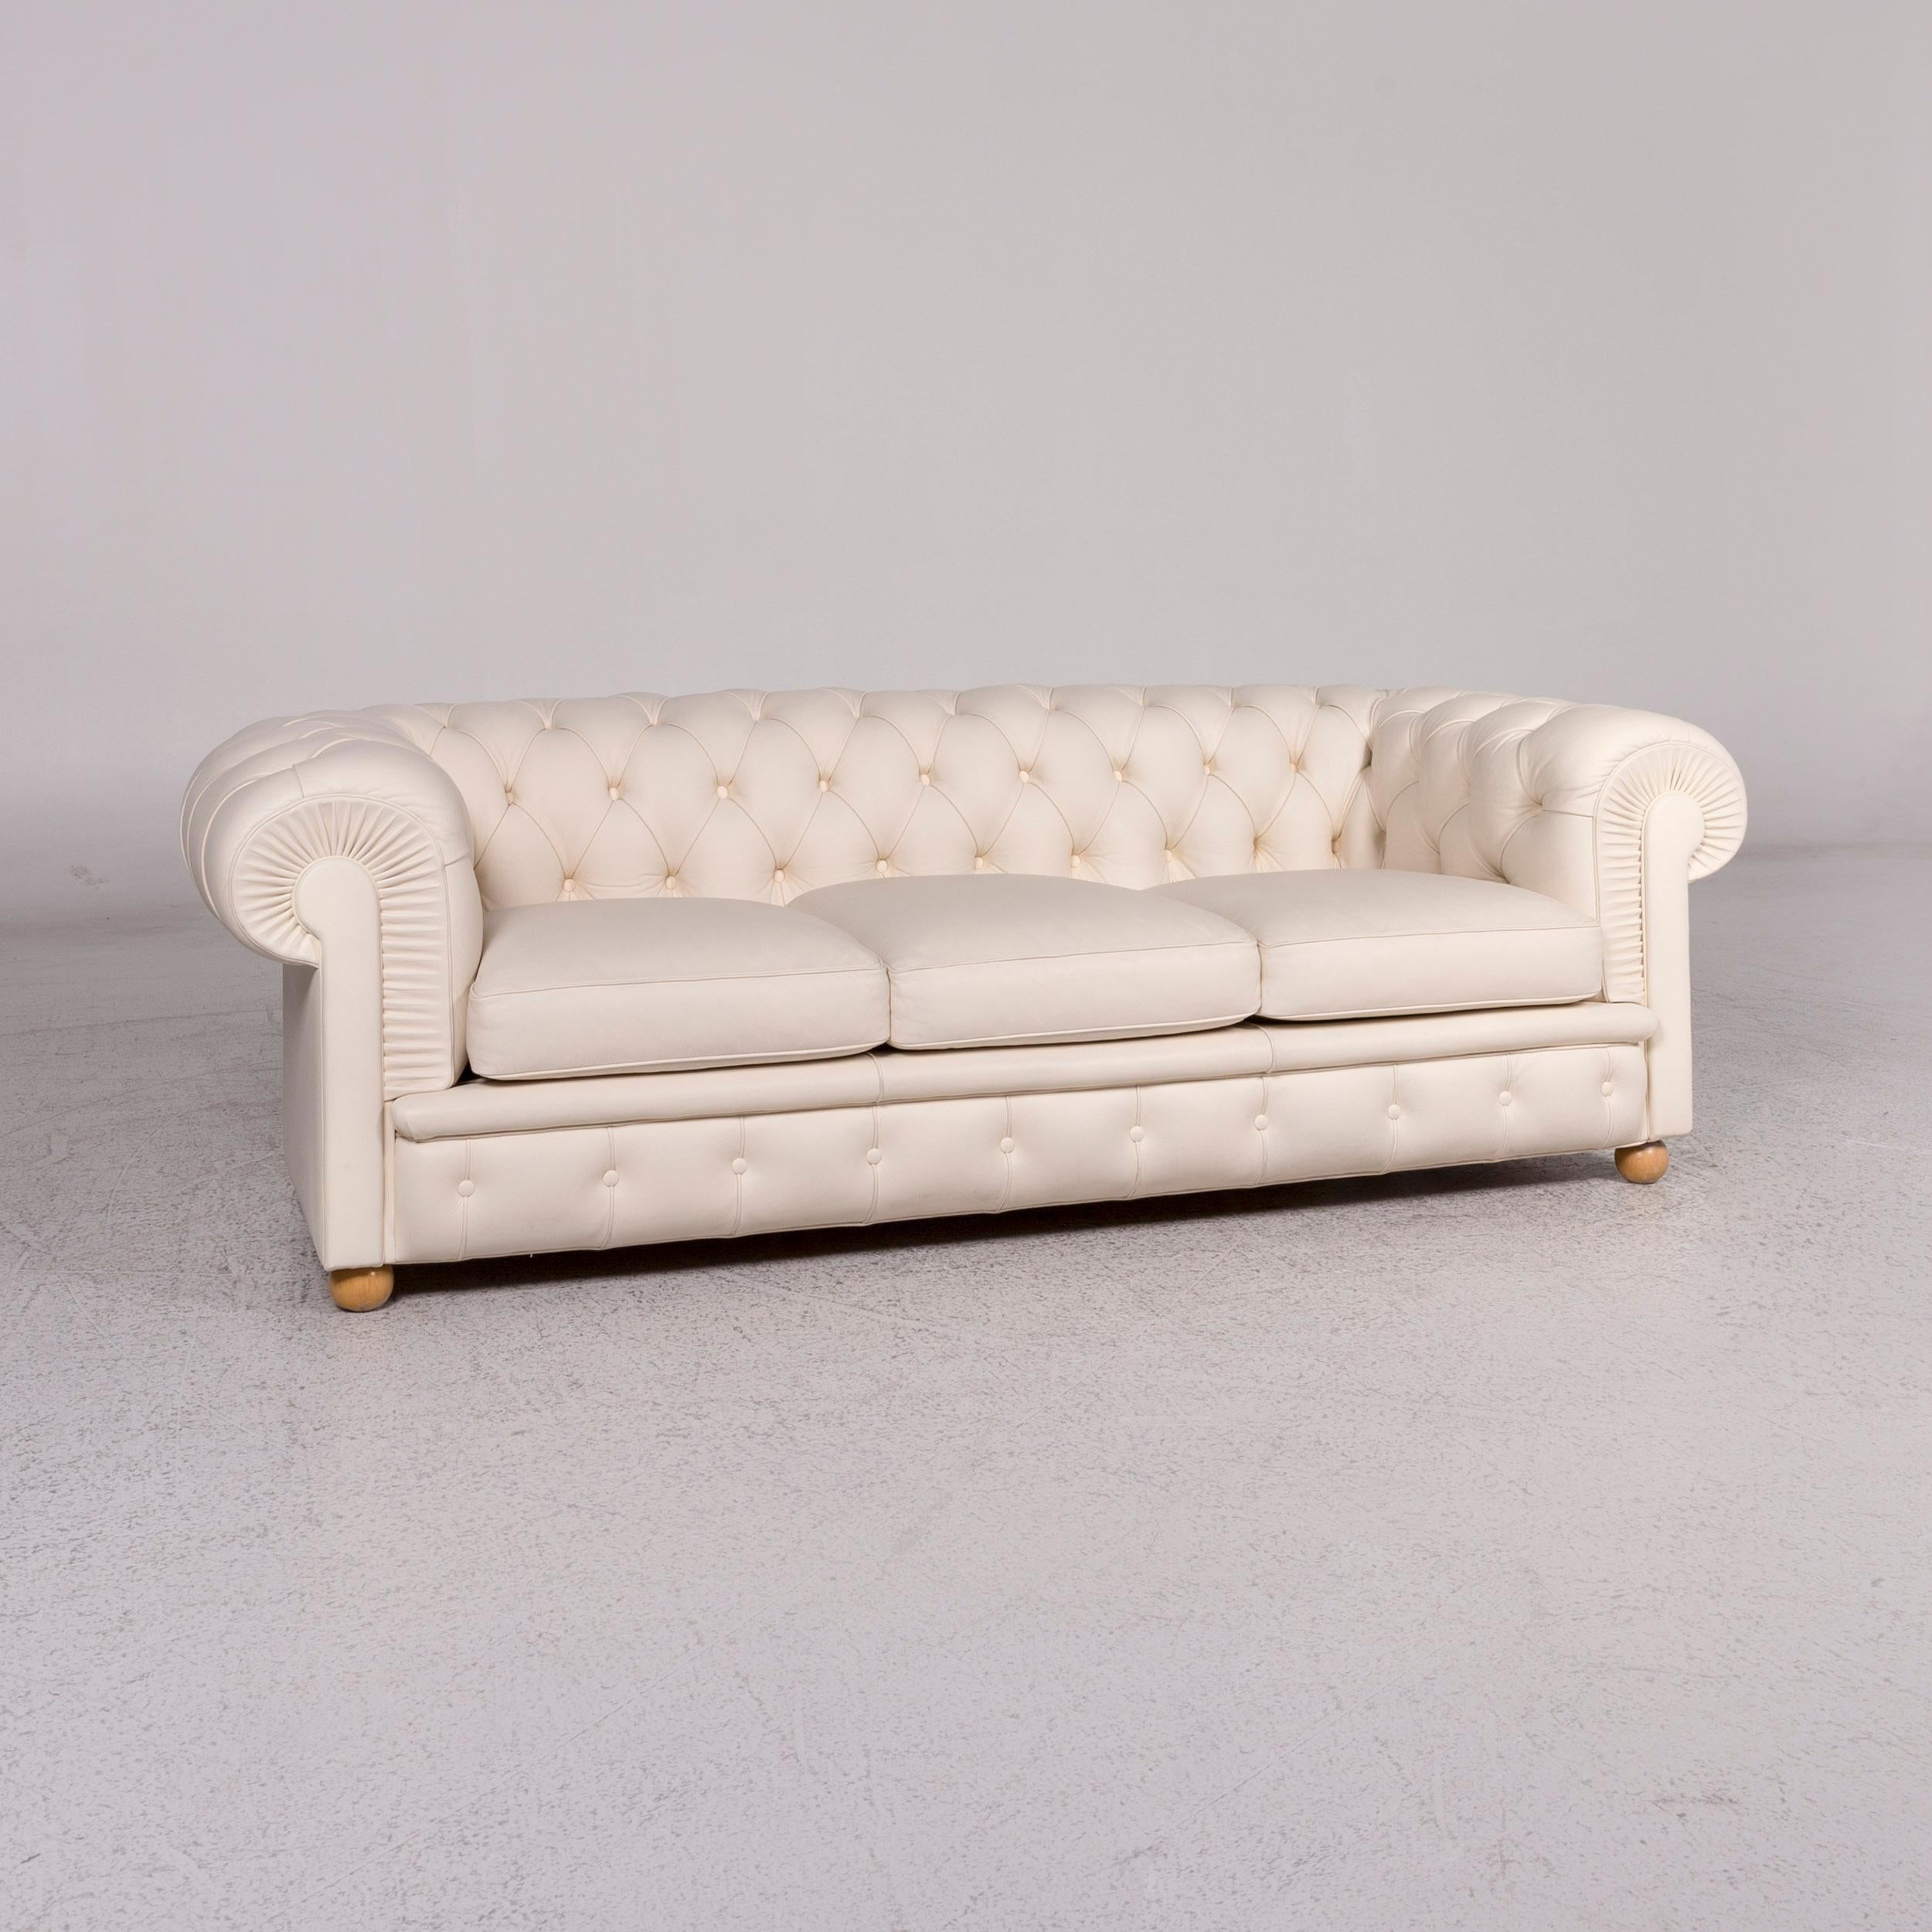 We bring to you a Poltrona Frau chester leder sofa creme weiß Dreisitzer retro Renzo Frau couch.

 Product measurements in centimeters:
 
Depth: 94
Width: 205
Height: 65
Seat-height: 43
Rest-height: 65
Seat-depth: 55
Seat-width: